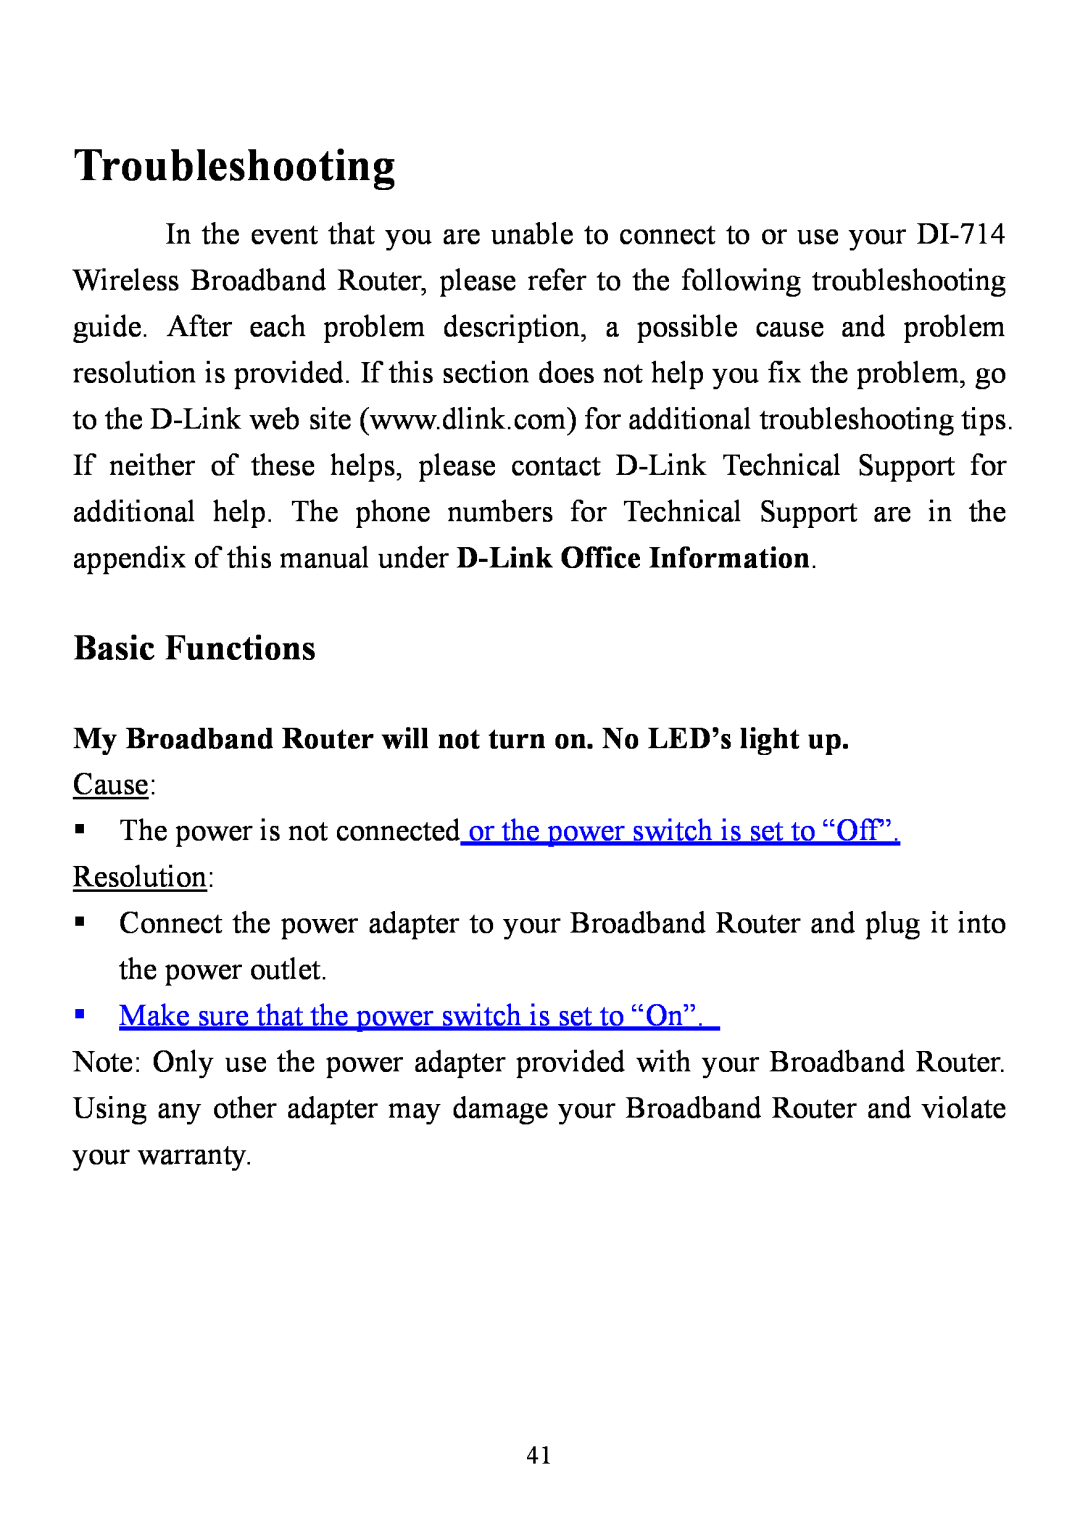 D-Link DI-714 user manual Troubleshooting, Basic Functions, My Broadband Router will not turn on. No LED’s light up 